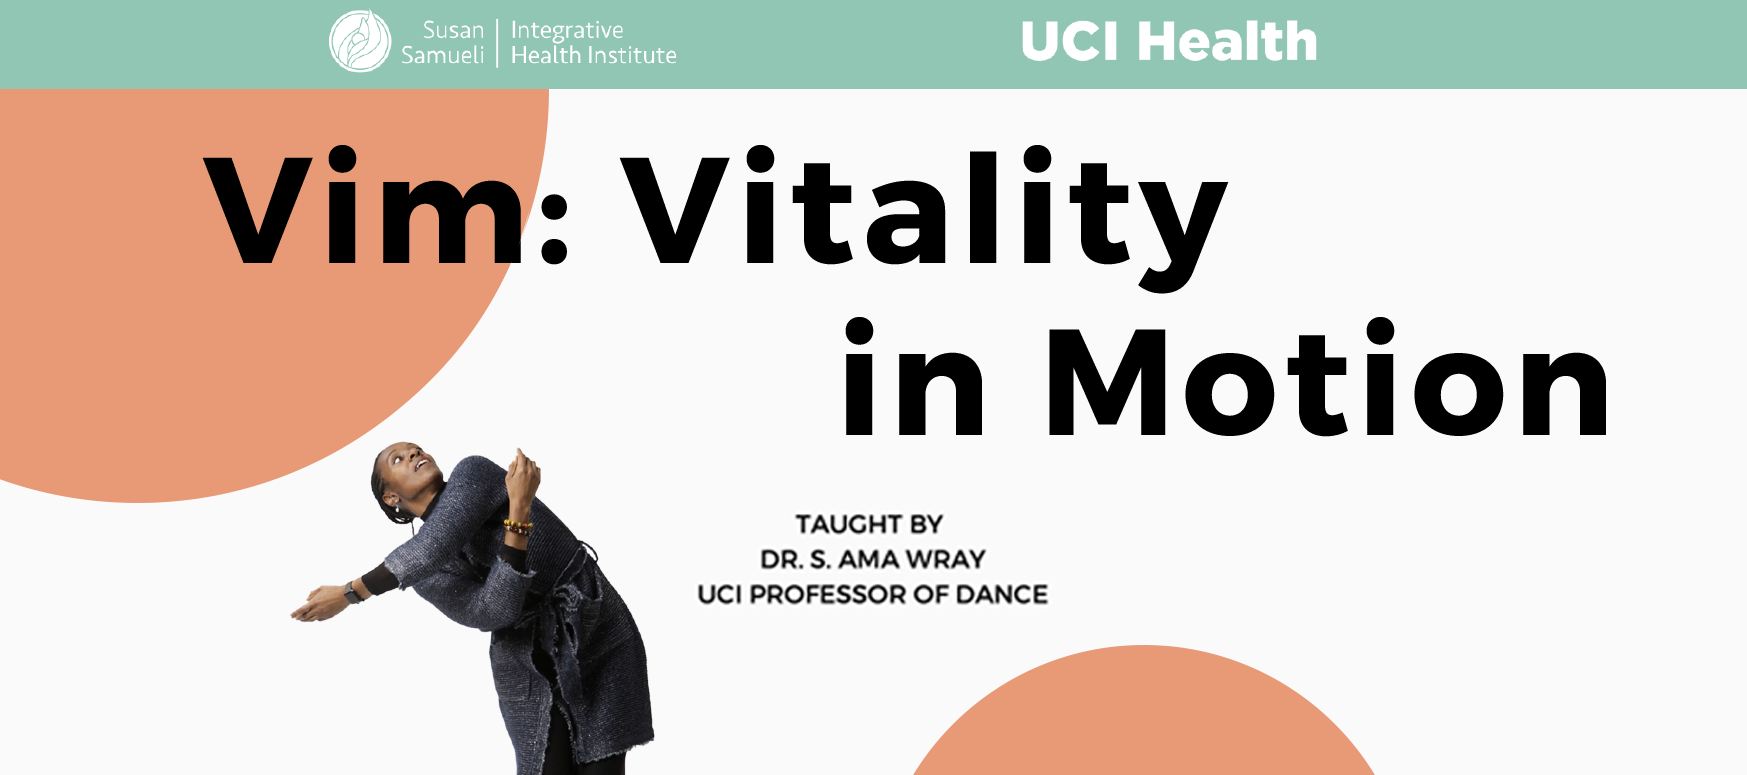 vitality in motion taught by Dr. S. Ama Wray UCI professor of dance banner image